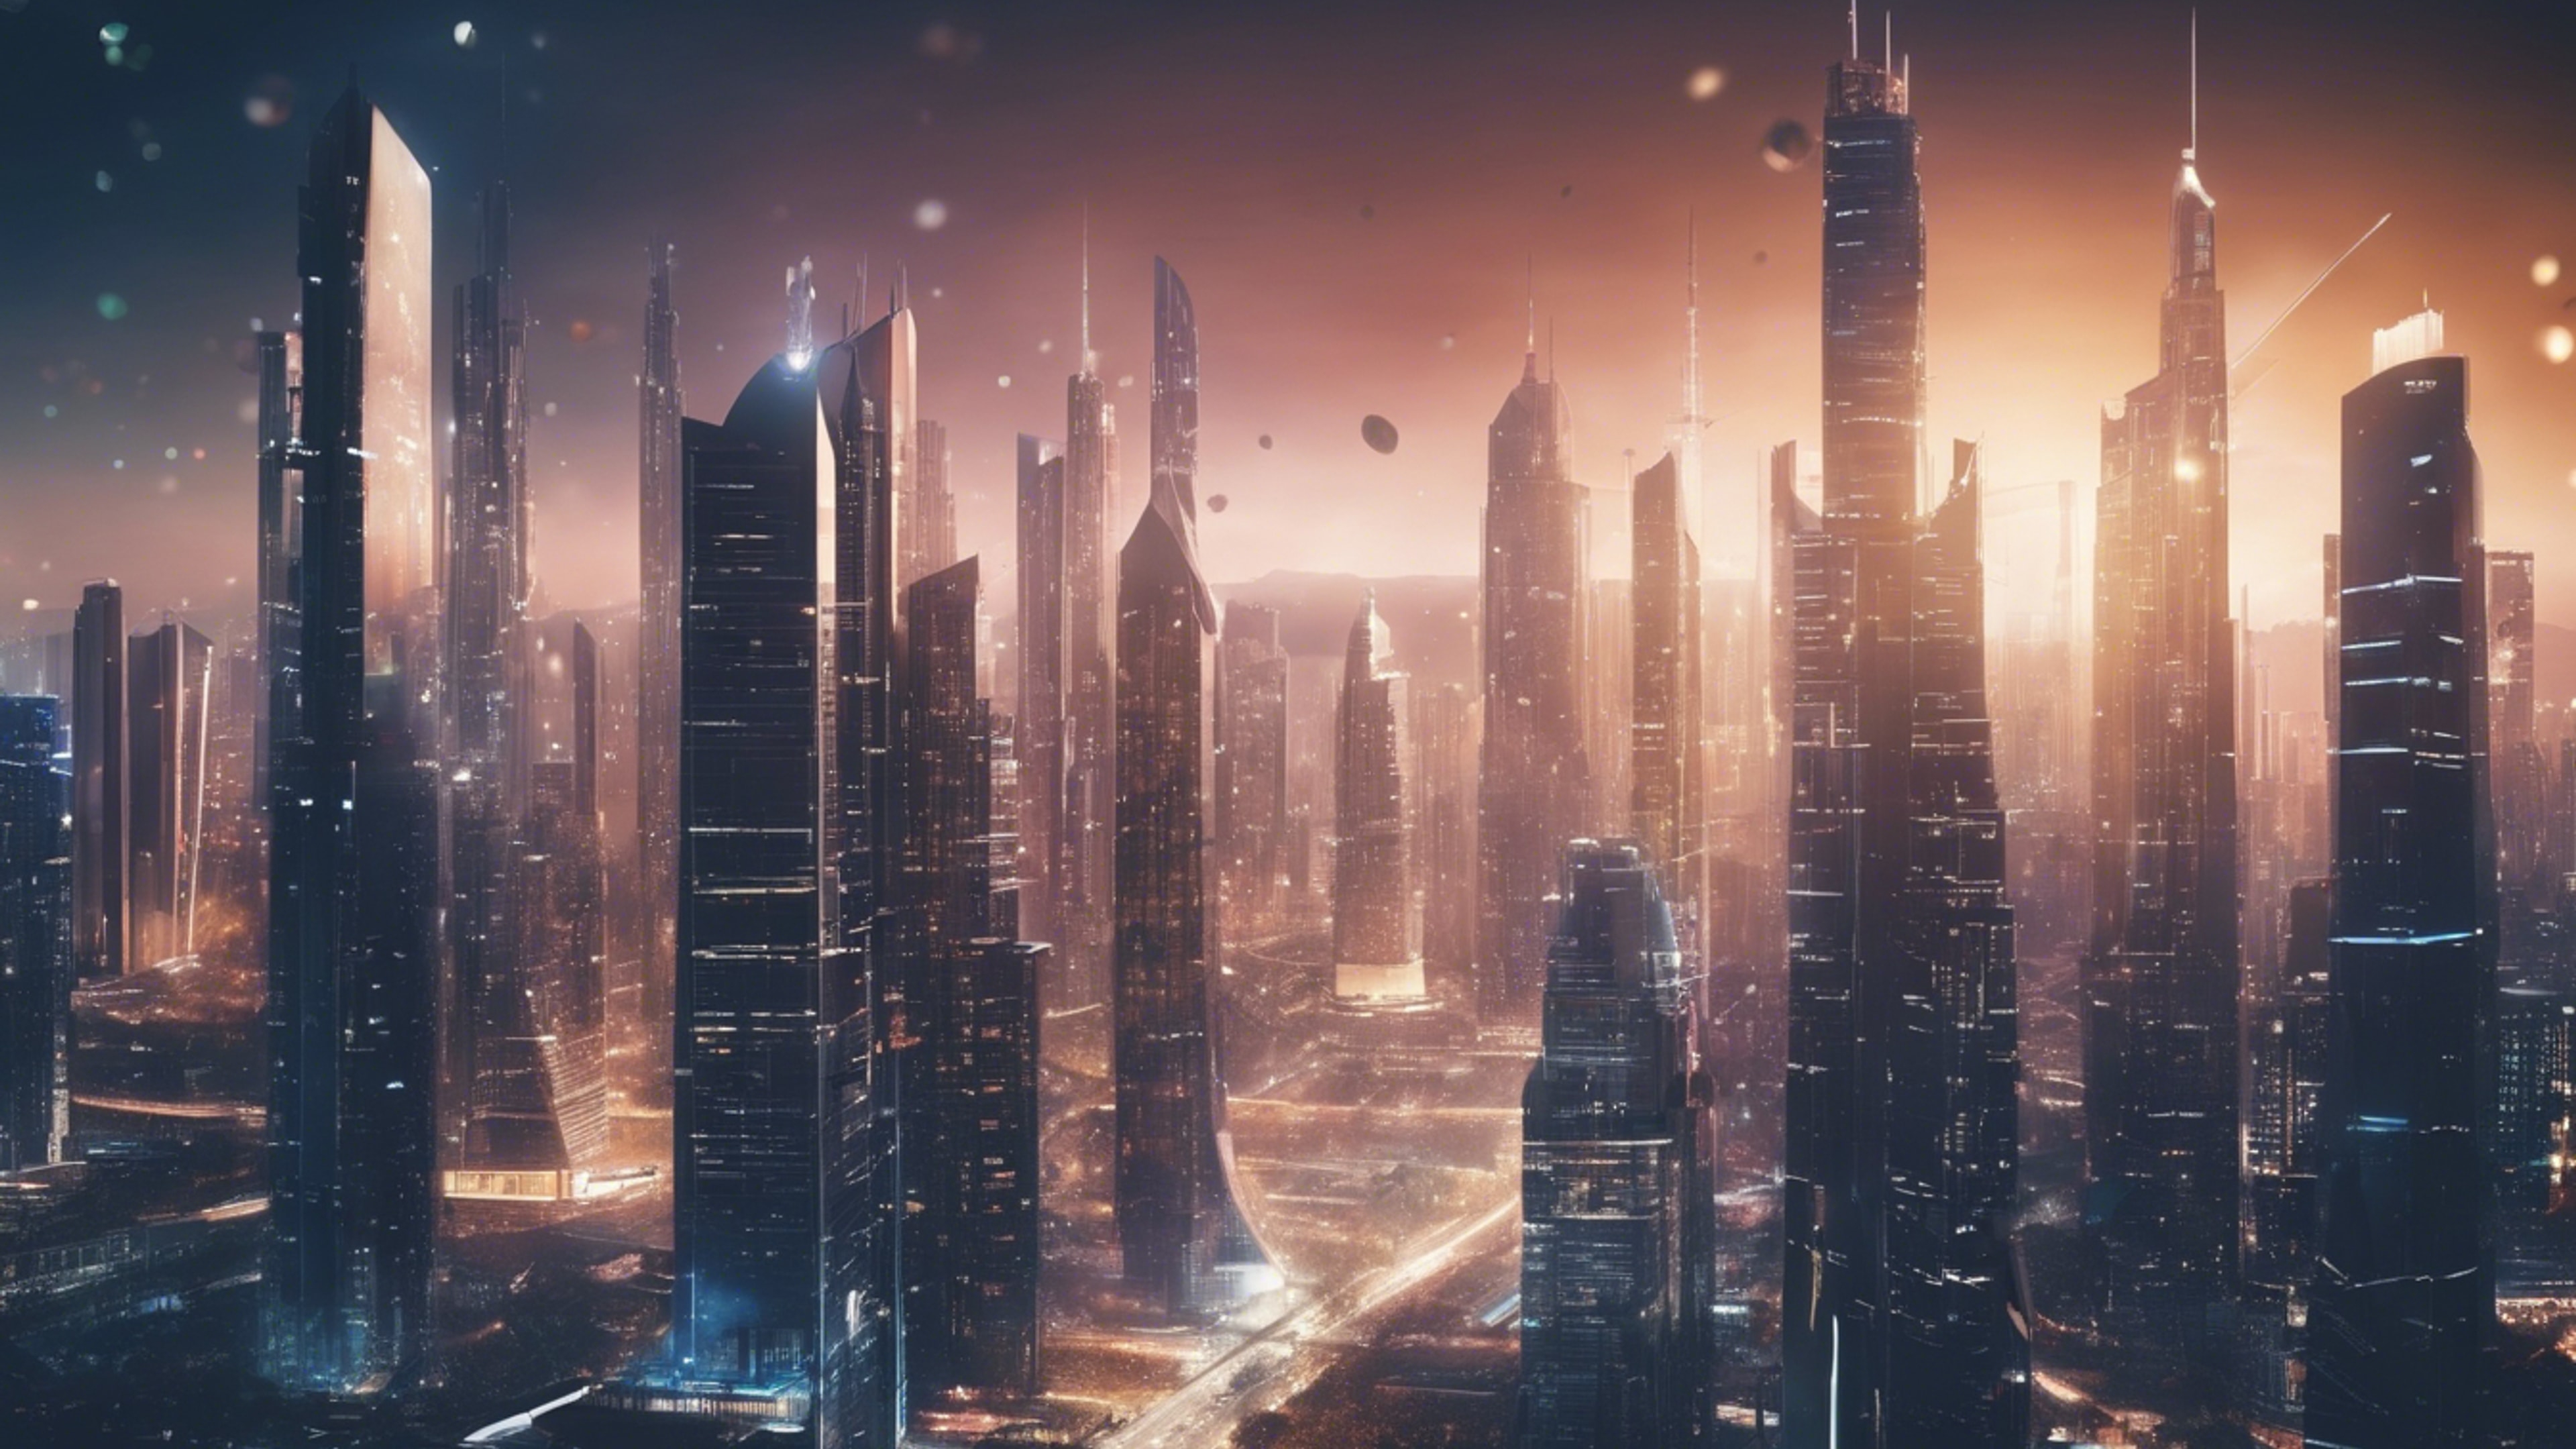 A detailed illustration of a megalopolis skyline with futuristic, AI-designed structures.壁紙[5acce17a495b4f288757]